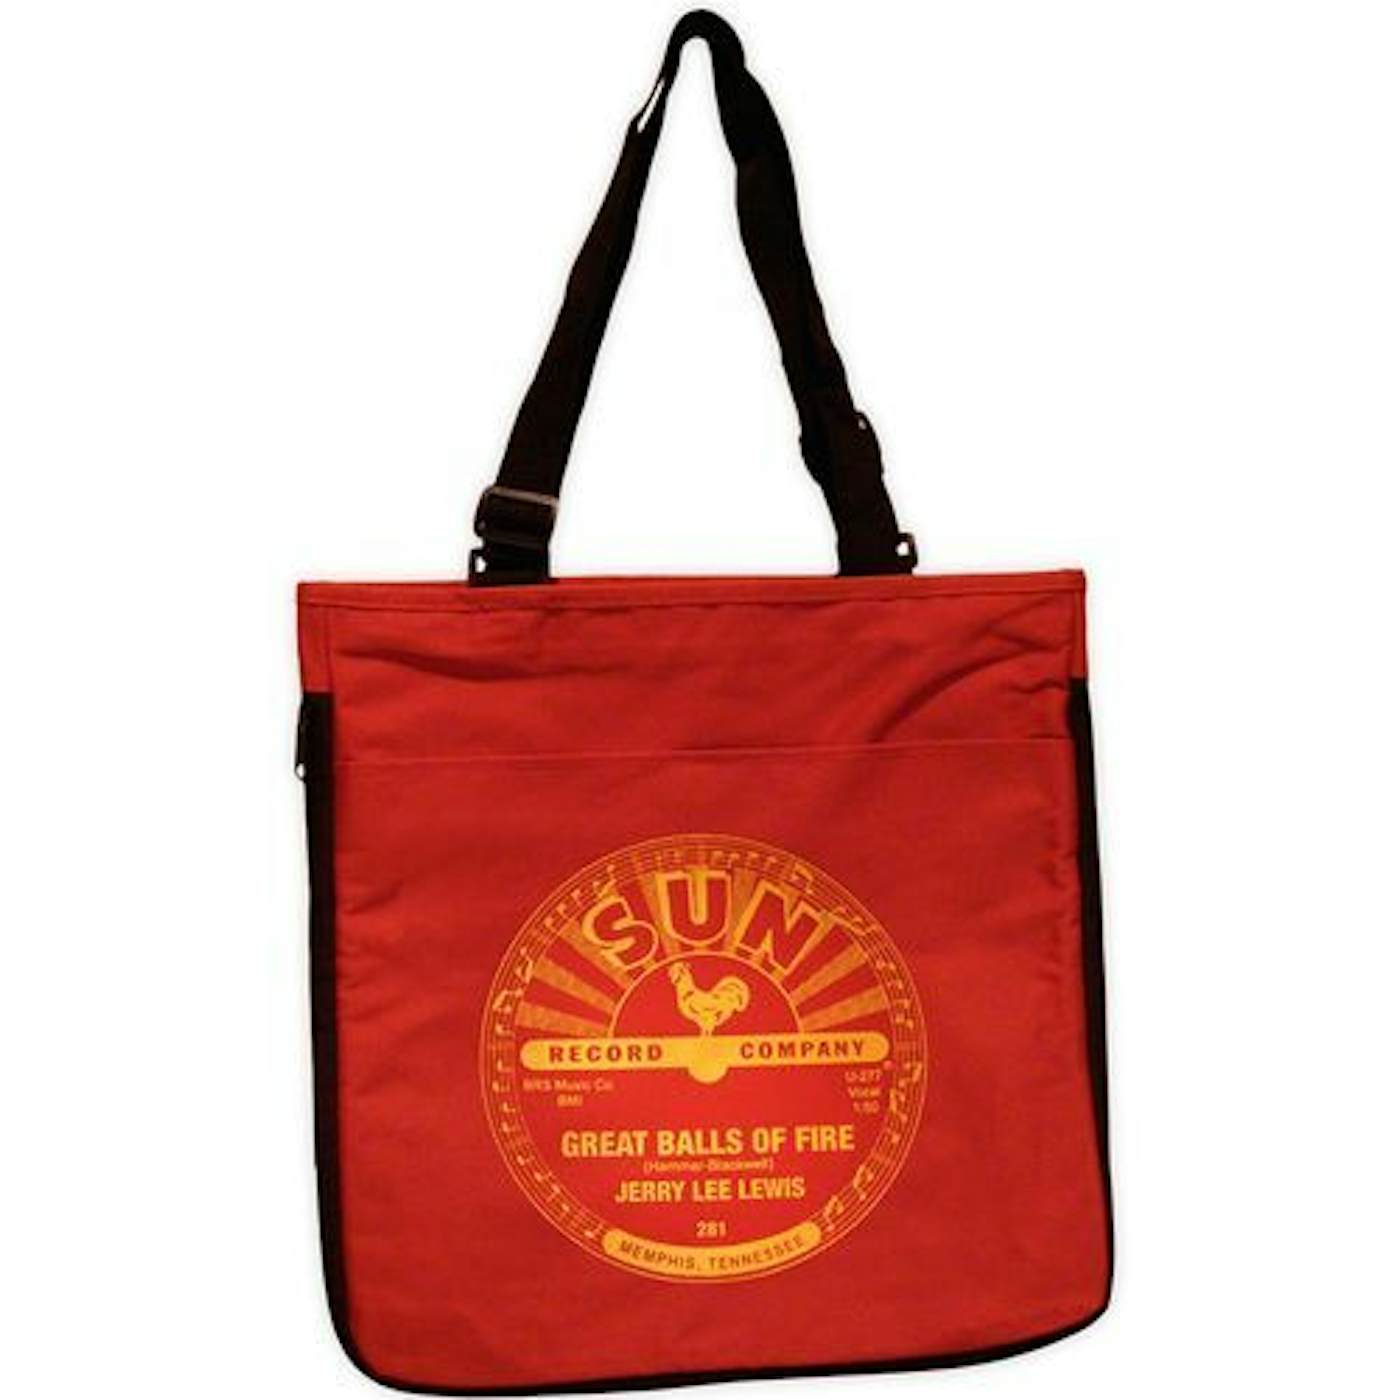 Jerry Lee Lewis Great Balls of Fire Tote Bag - Red